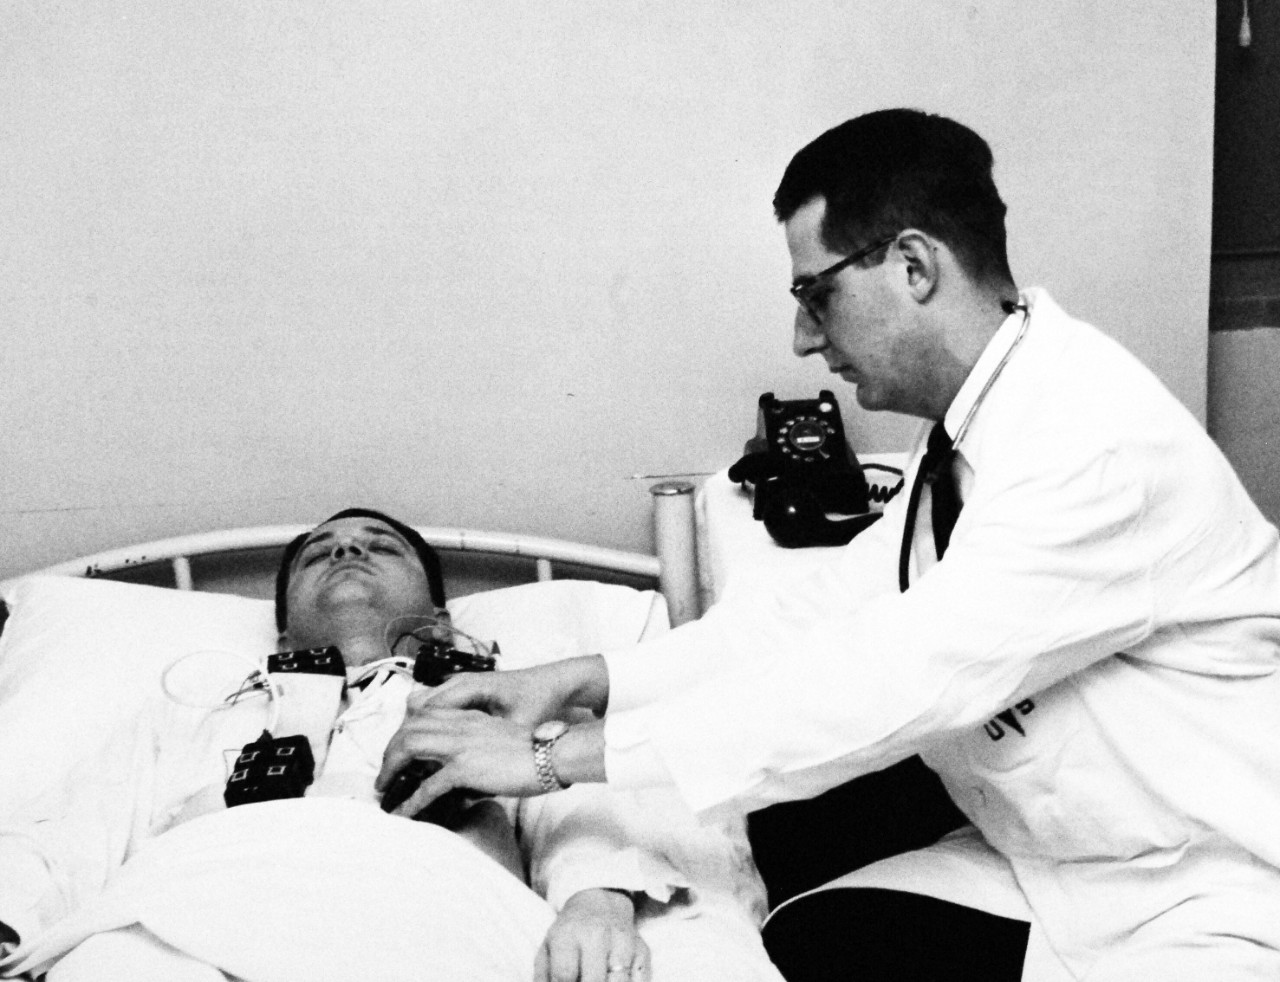 330-PS-8850-5:  U.S. Navy Conducts Physical Studies By Telephone.  Lieutenant N. R. Stanport, MC, USN, attaching electrode and power supply to patient, March 21, 1958.  Official Department of Defense photograph, now in the collection of the National Archives.   